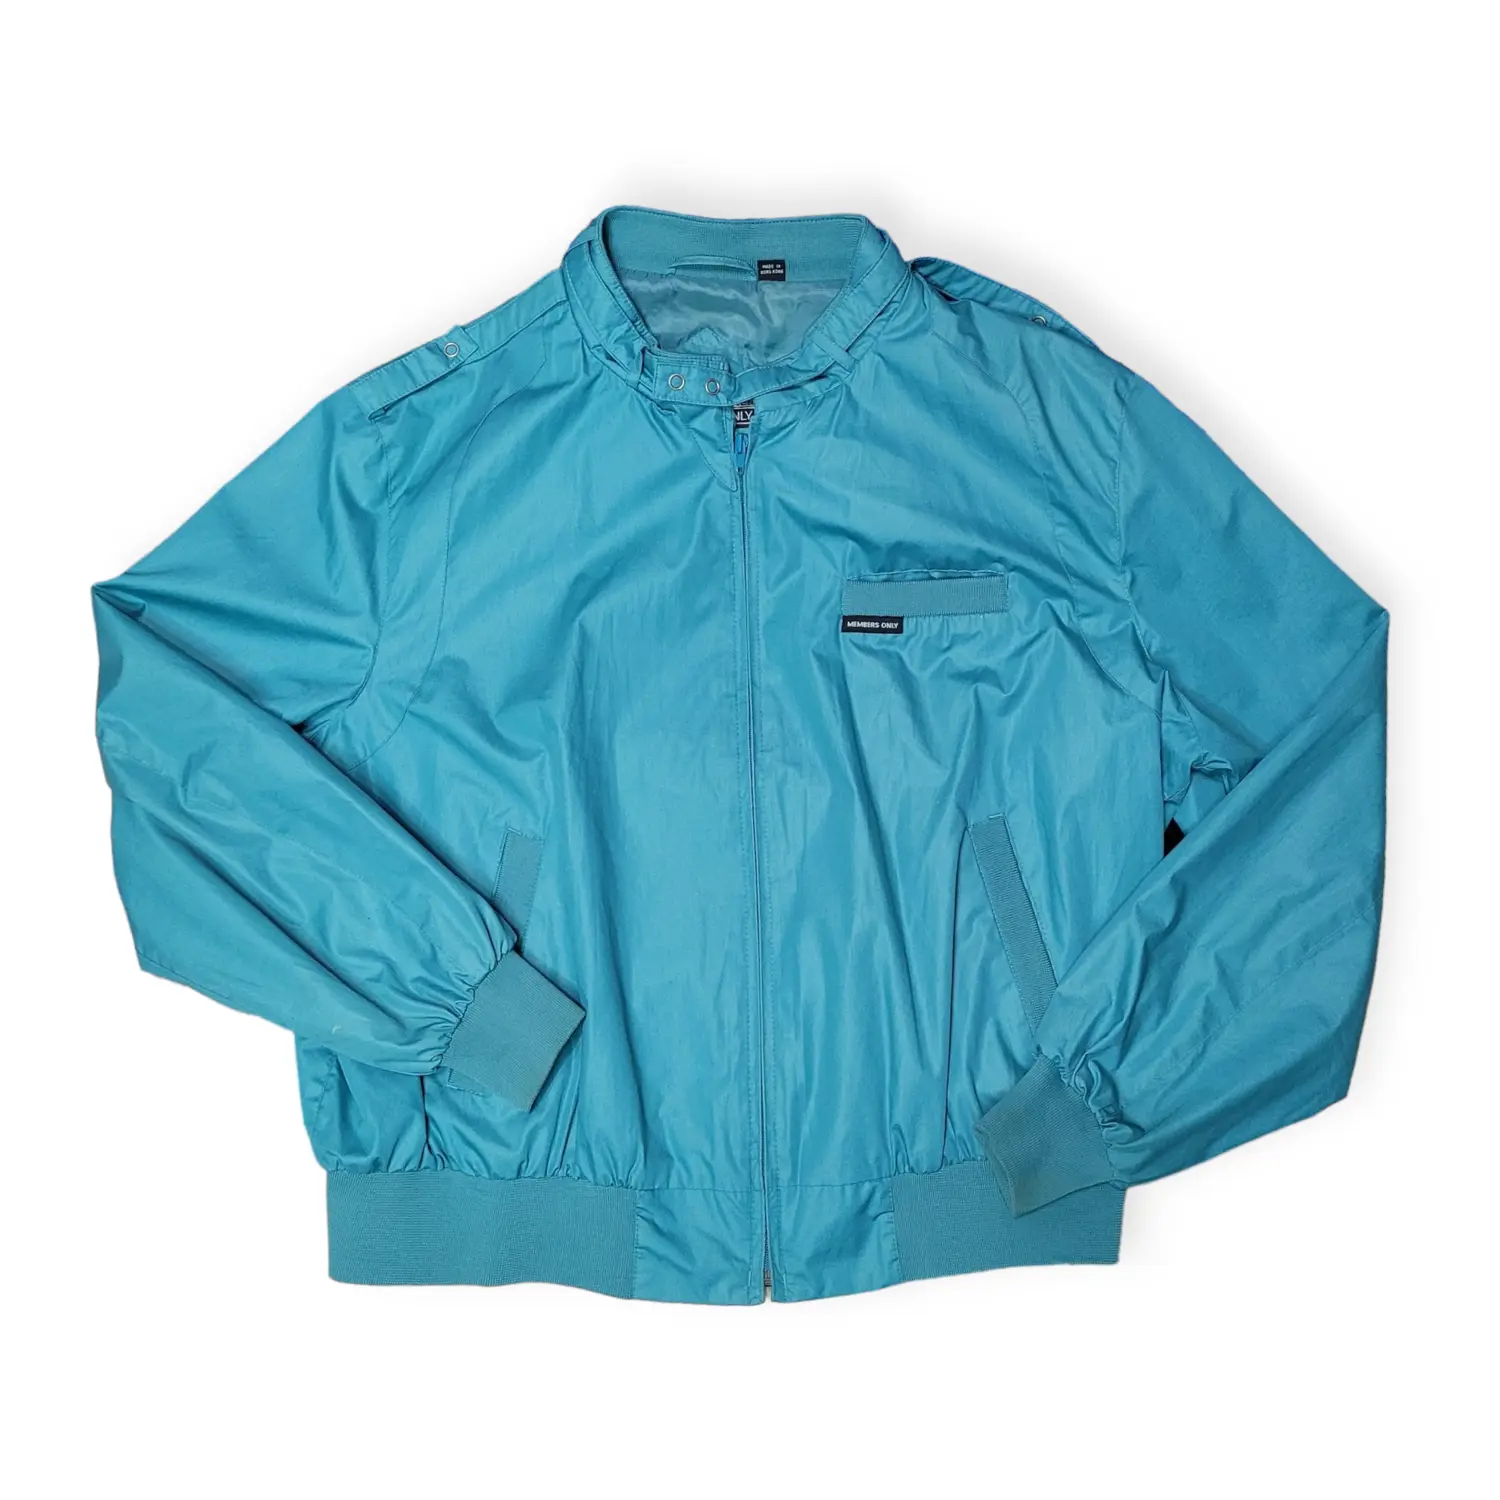 Vintage Members Only Teal Bomber Jacket - Size: L/XL